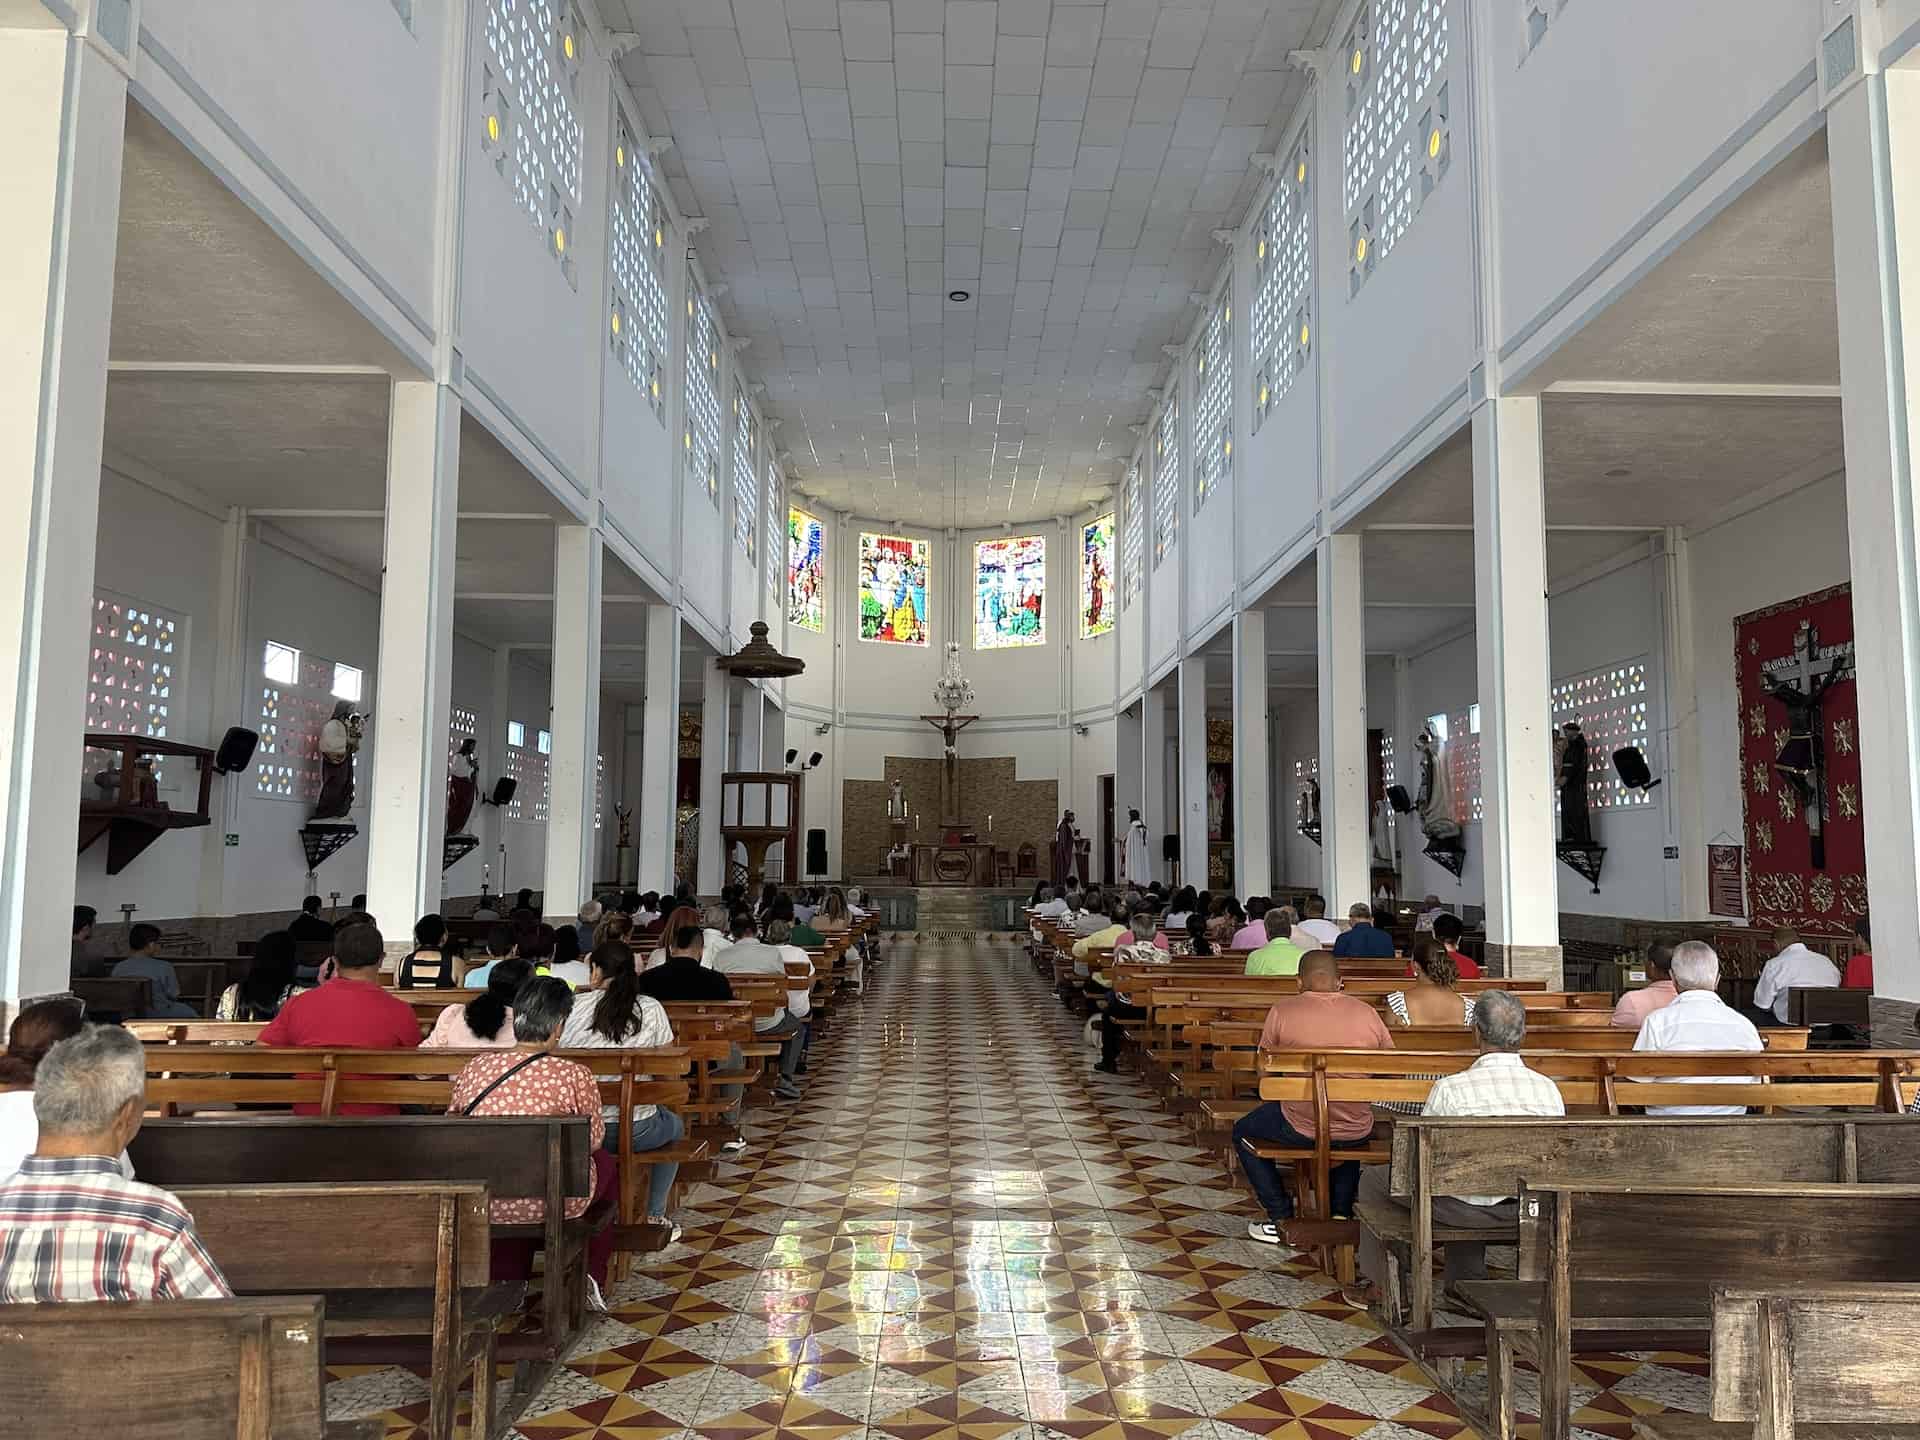 Nave of the Church of Our Lady of Mercy in La Merced, Caldas, Colombia